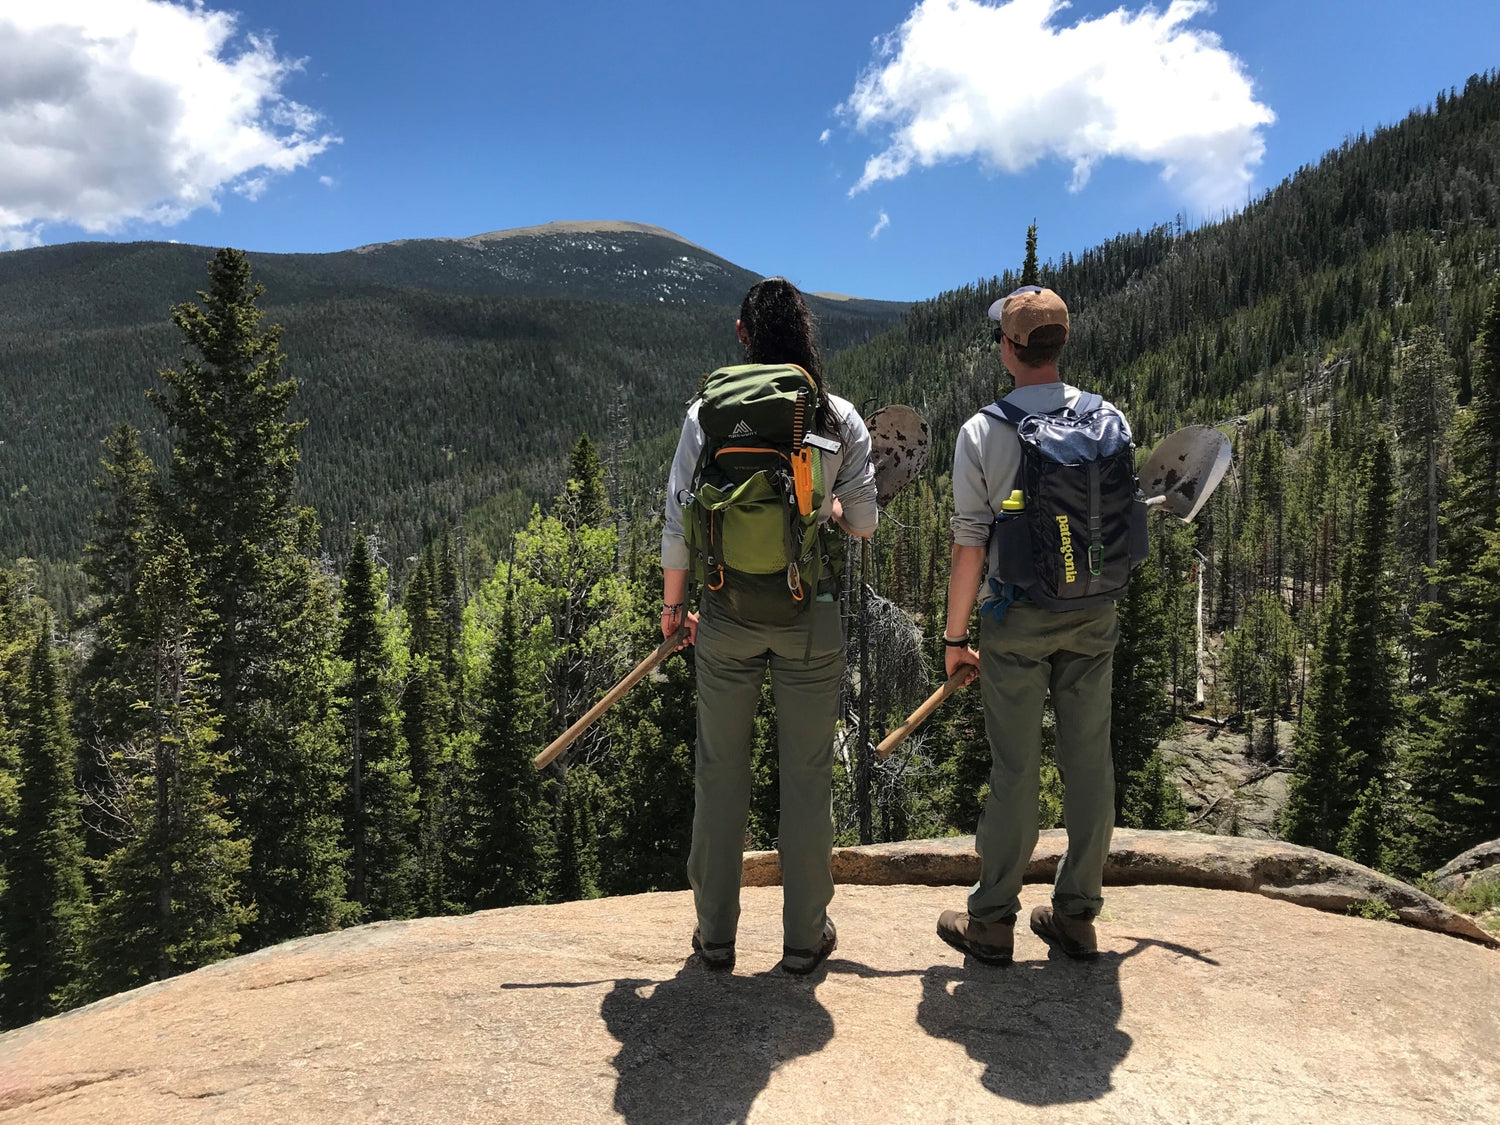 An Underlying Program of Superheroes in Rocky Mountain National Park